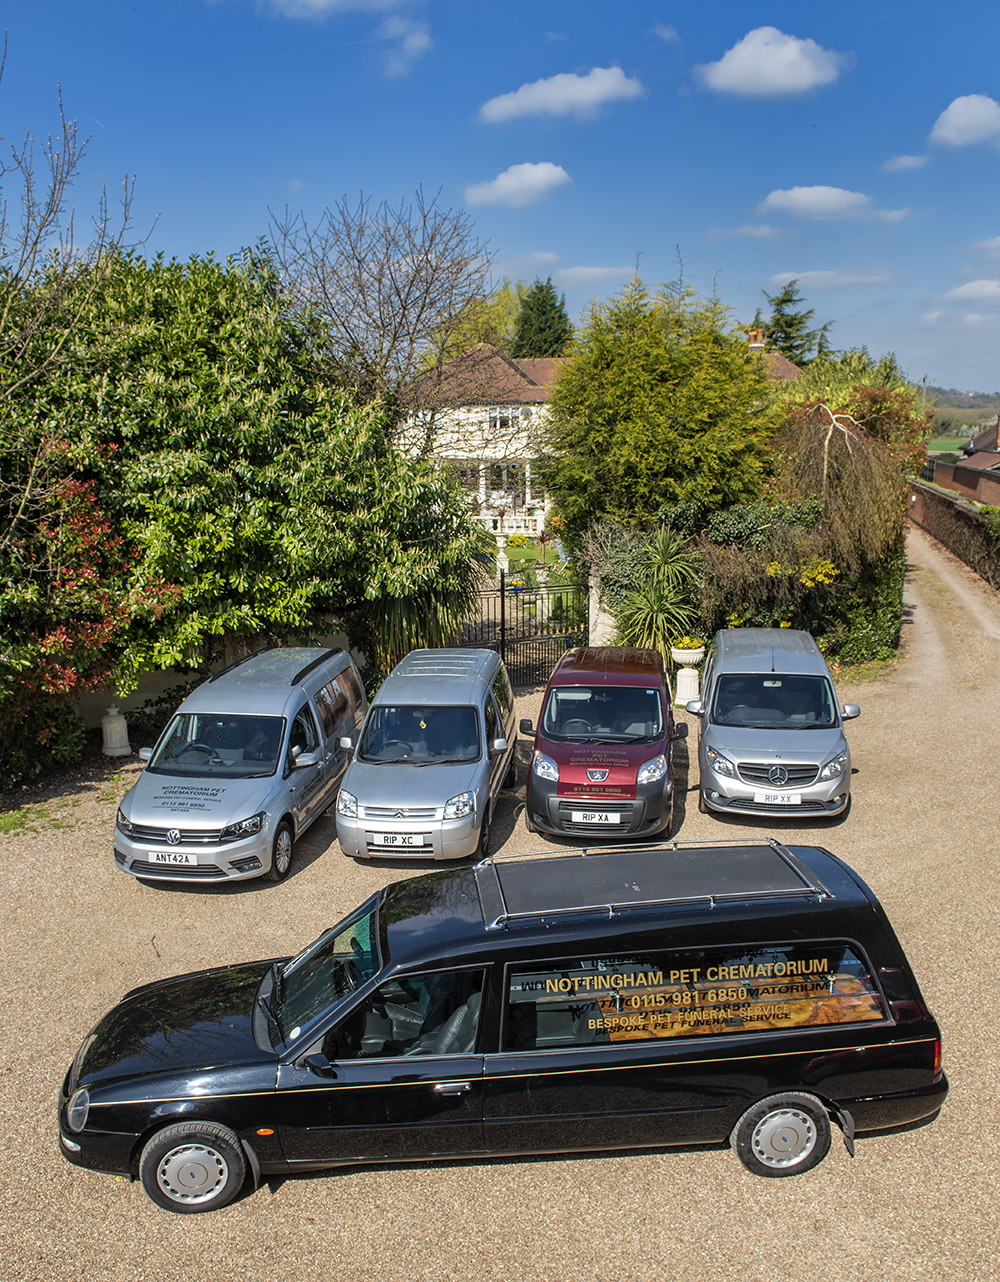 Our fleet of 5 multi-purpose vehicles including a traditional hearse